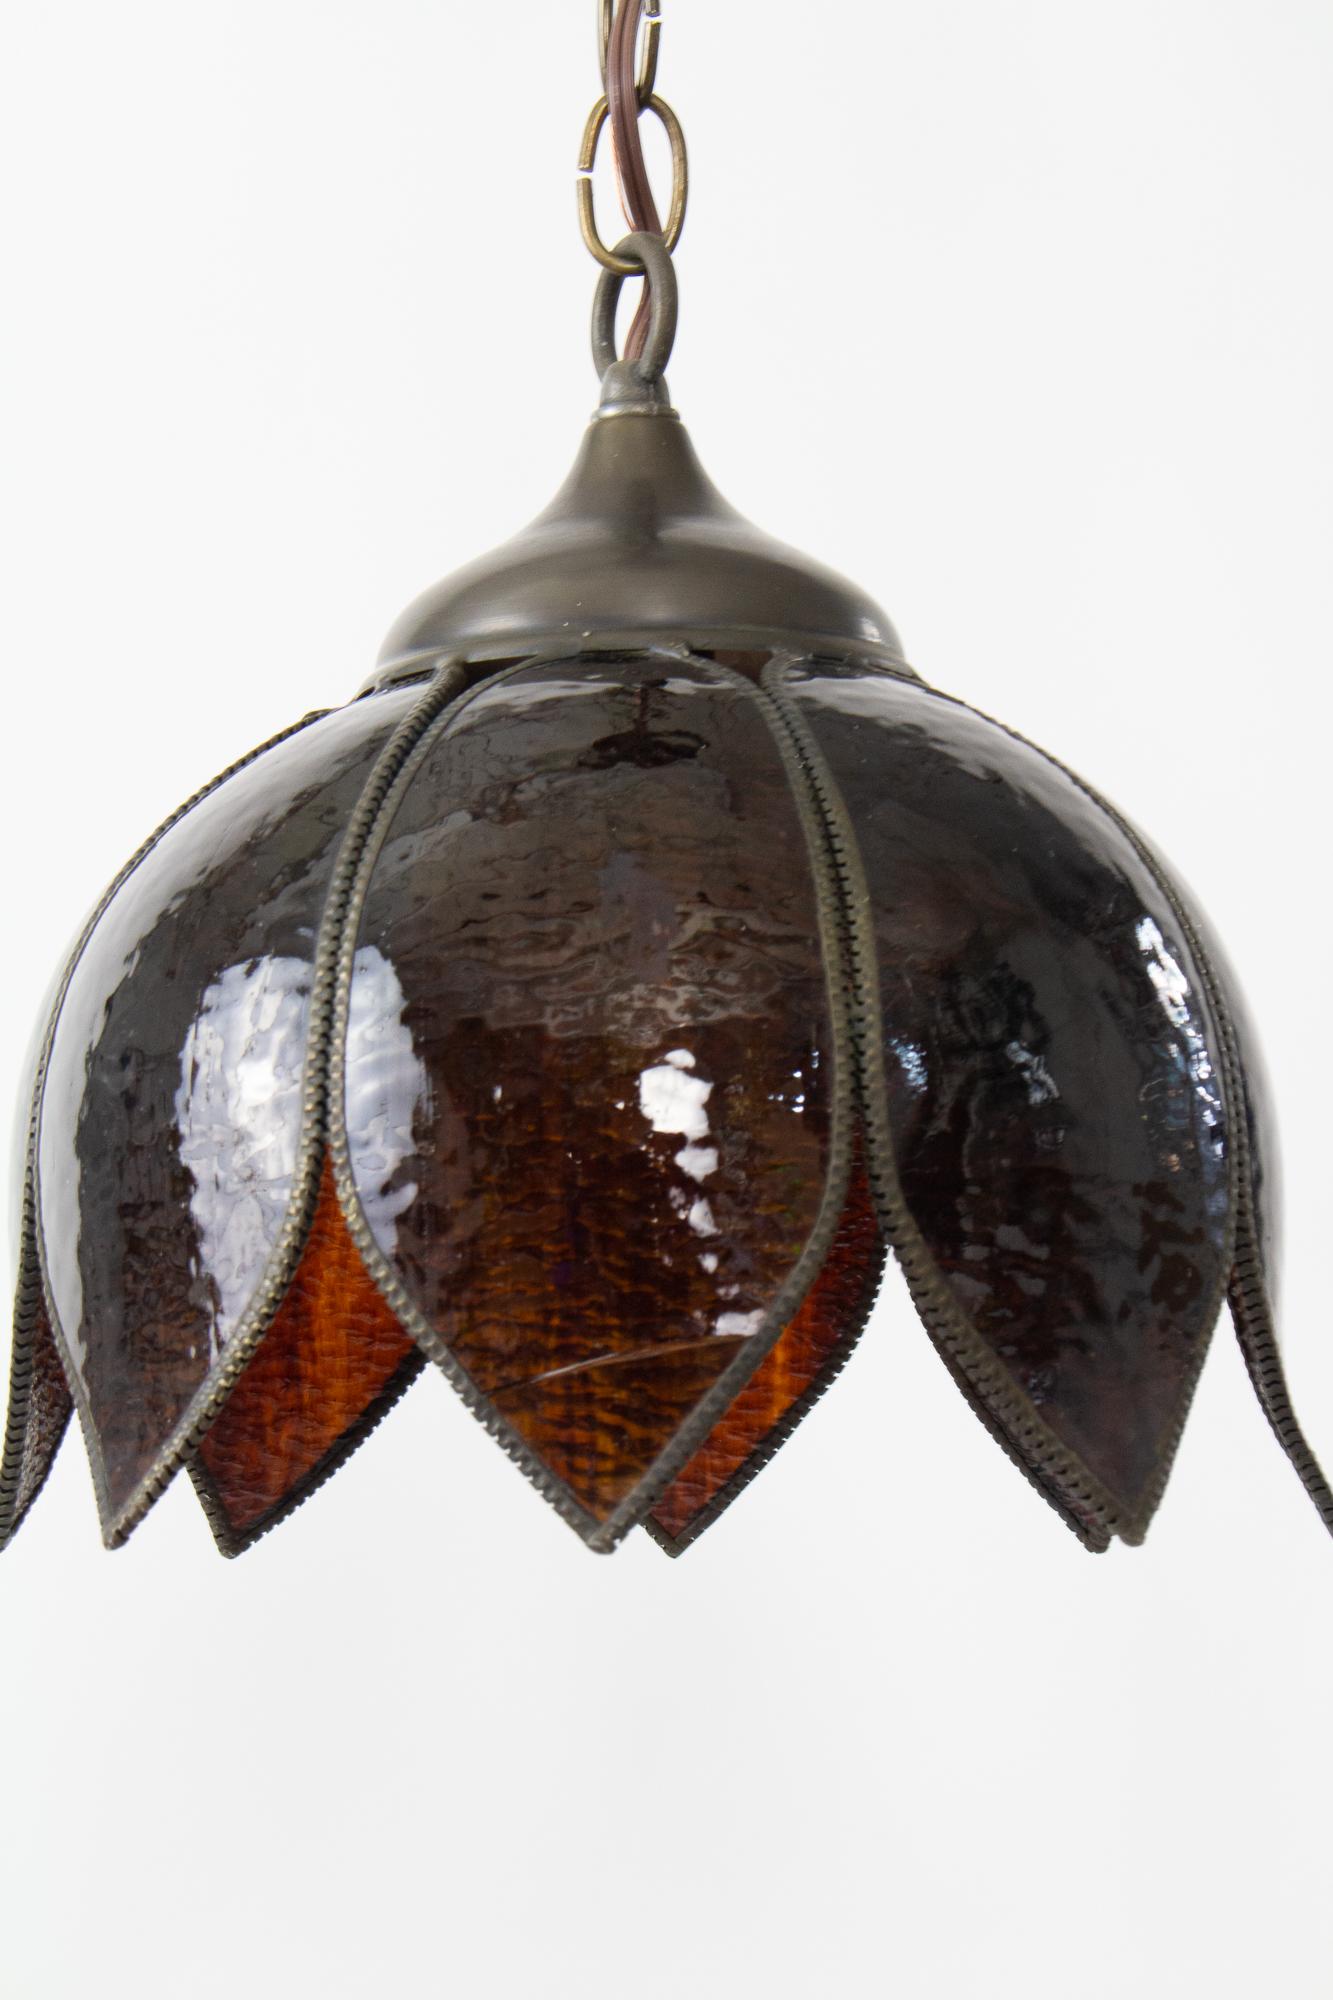 Curved, “slumped” brown art glass panels form a tulip shape. Brass hardware and trim. Single socket, can be used with 100 Watt max bulb. Cleaned and rewired. There is a crack in one of the petals, shown in photos. It is secure in the fixture. The